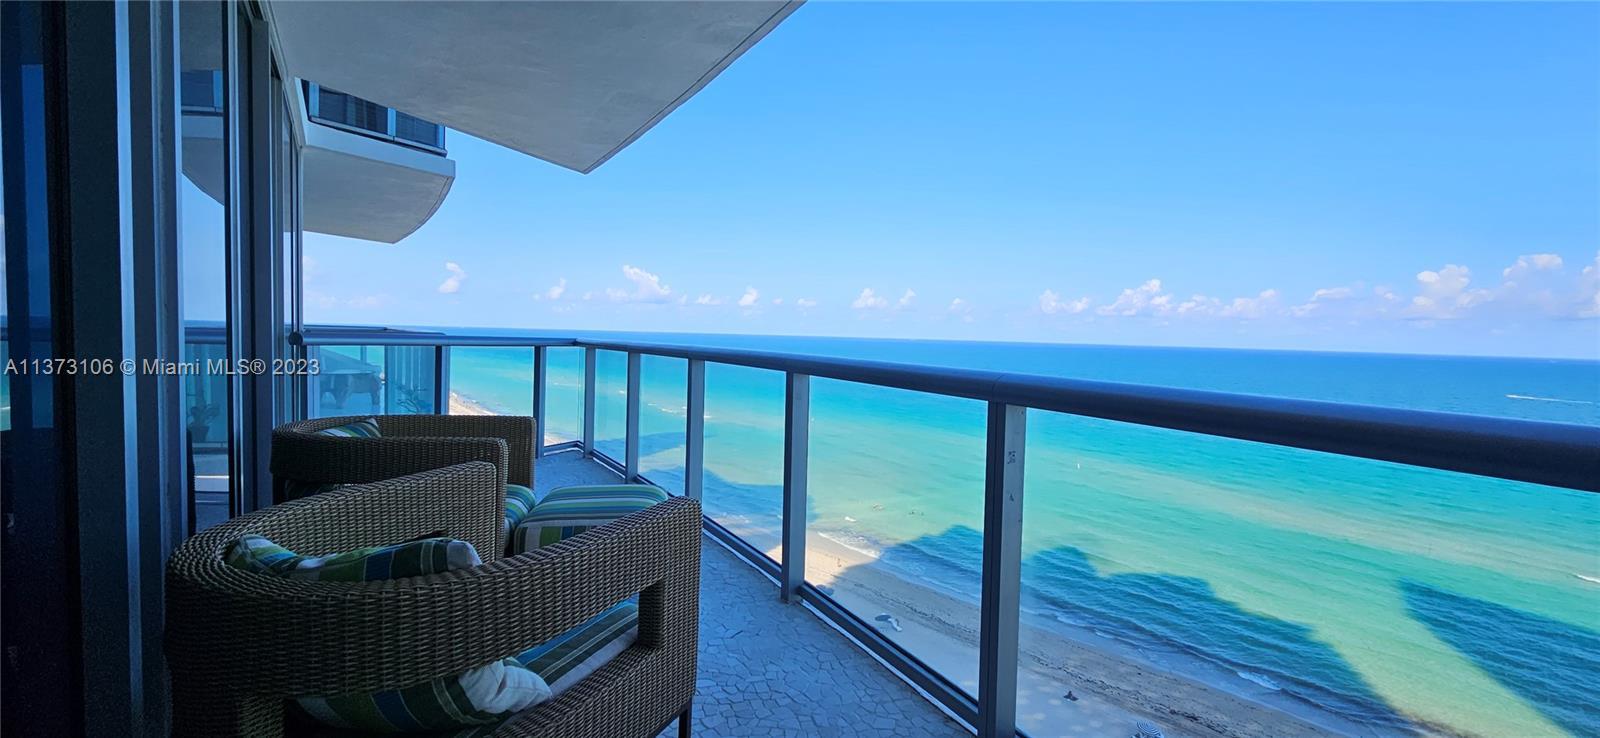 Wake up to mesmerizing direct ocean views in this totally upgraded 1 bedroom/1.5 bath residence at t